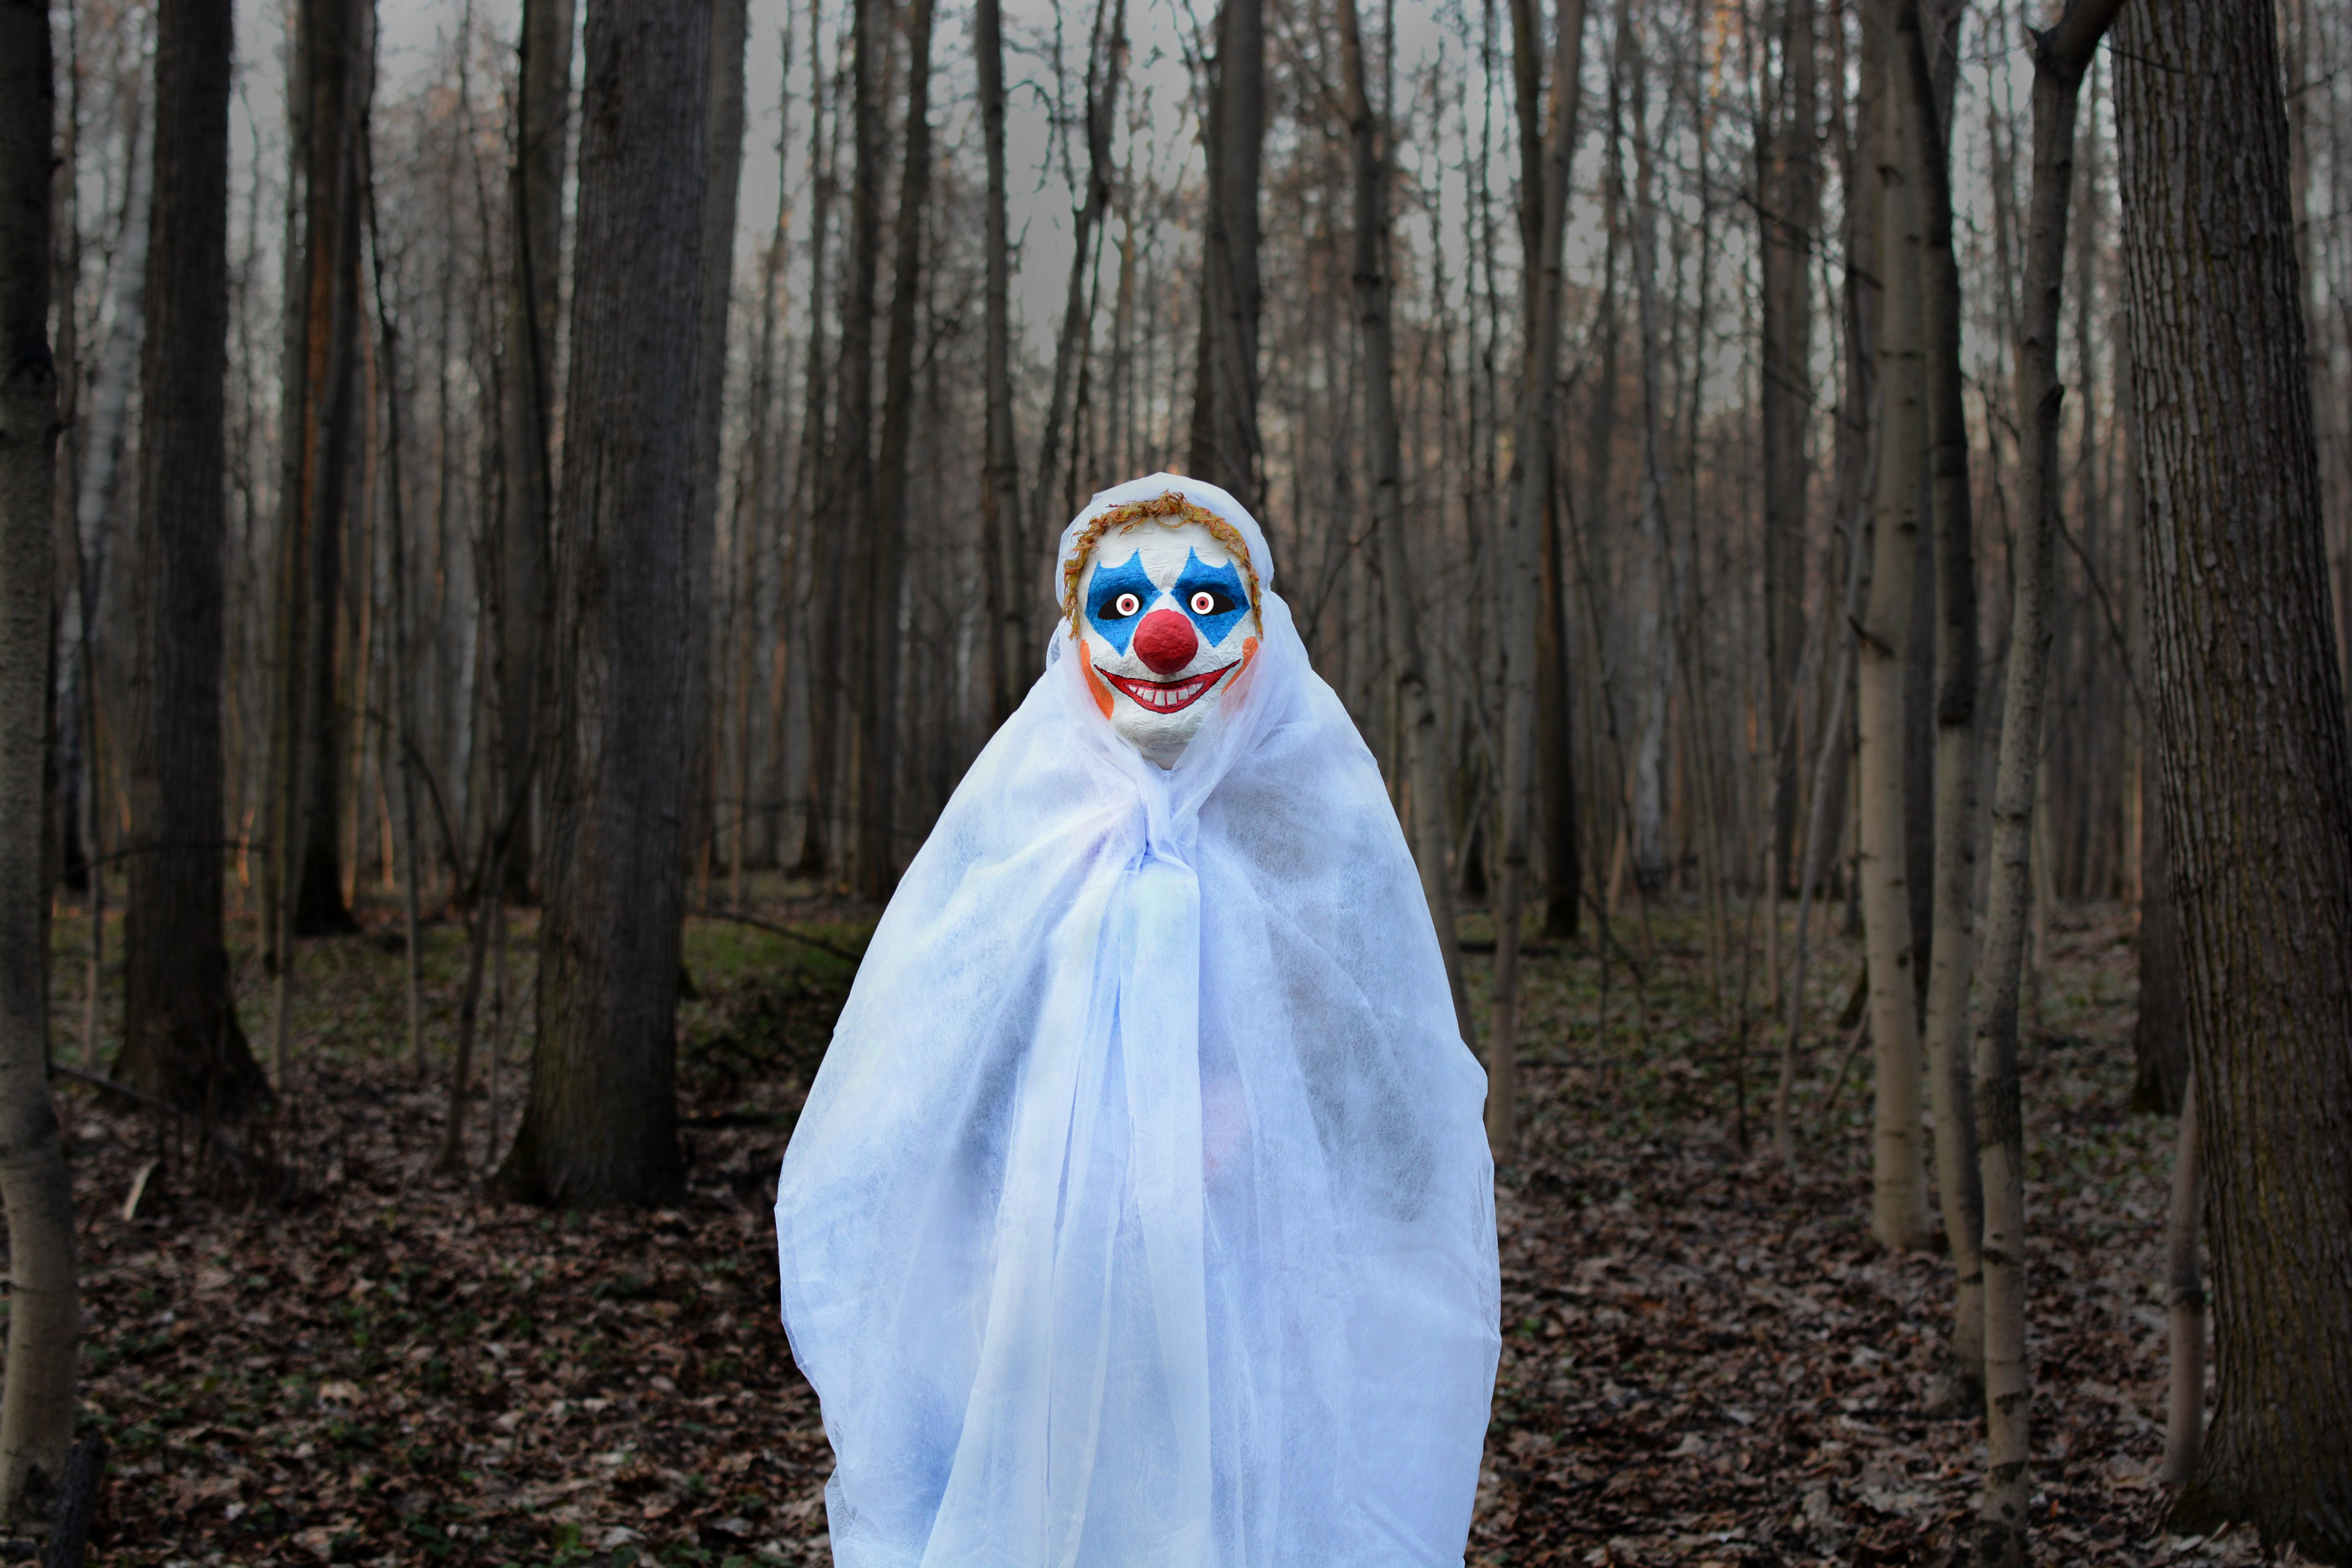 A 2008 study found few children actually like clowns. (kobzev3179—Getty Images/iStockphoto)